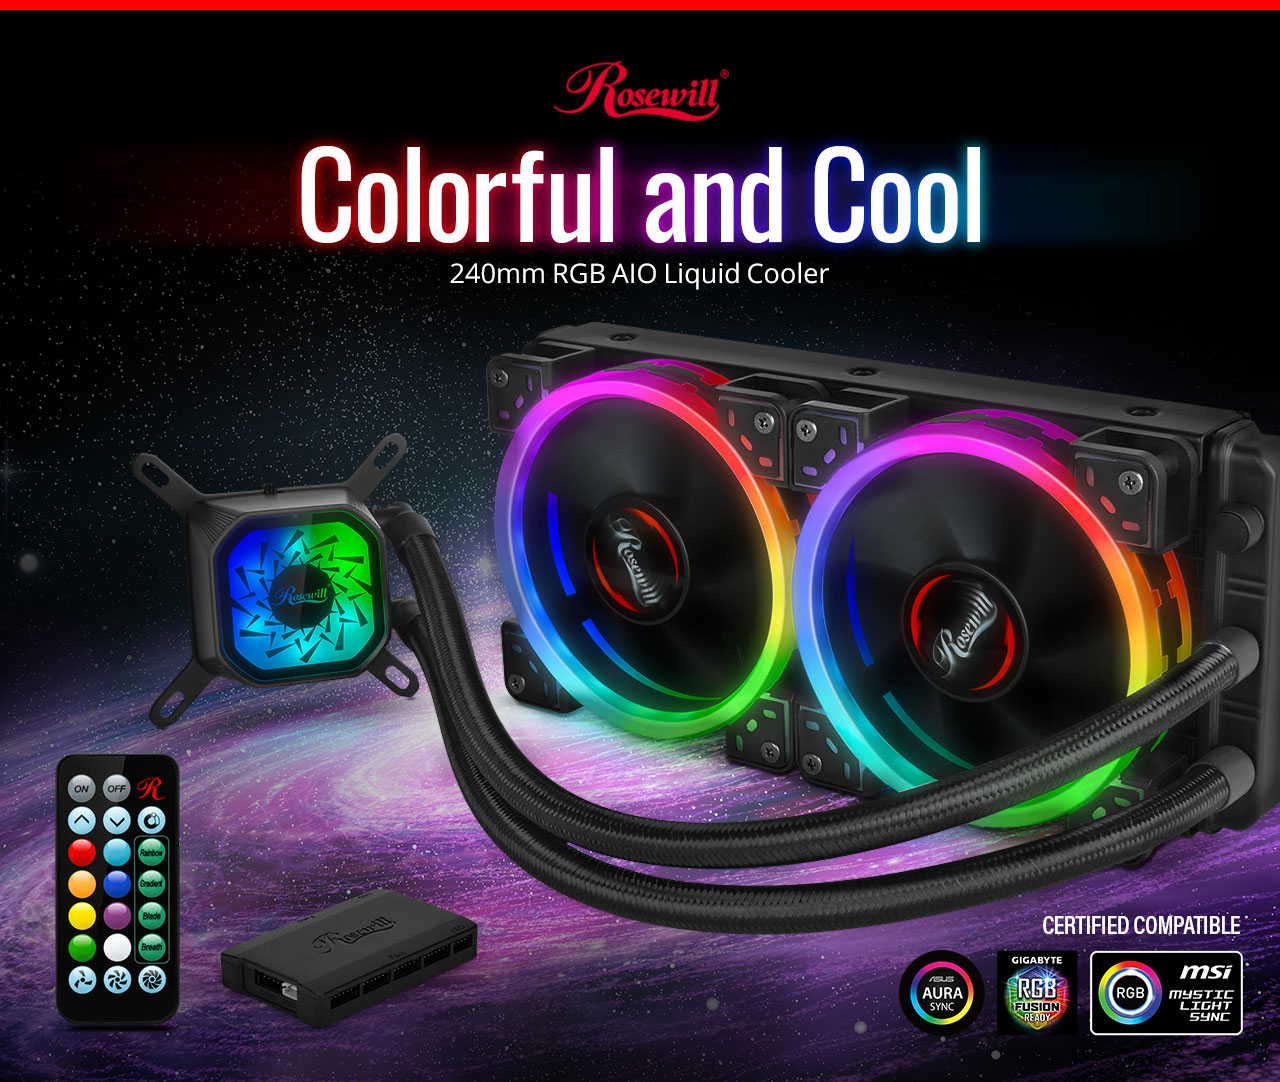 Rosewill PB240-RGB 240mm RGB AIO Liquid Cooler floating in space next to its remote, USB dock, badges for ASUS AURA SYNC, GIGABYTE RGB FUSION and MYSTIC LIGHT SYNC. Above the product is text that reads: Colorful and Cool